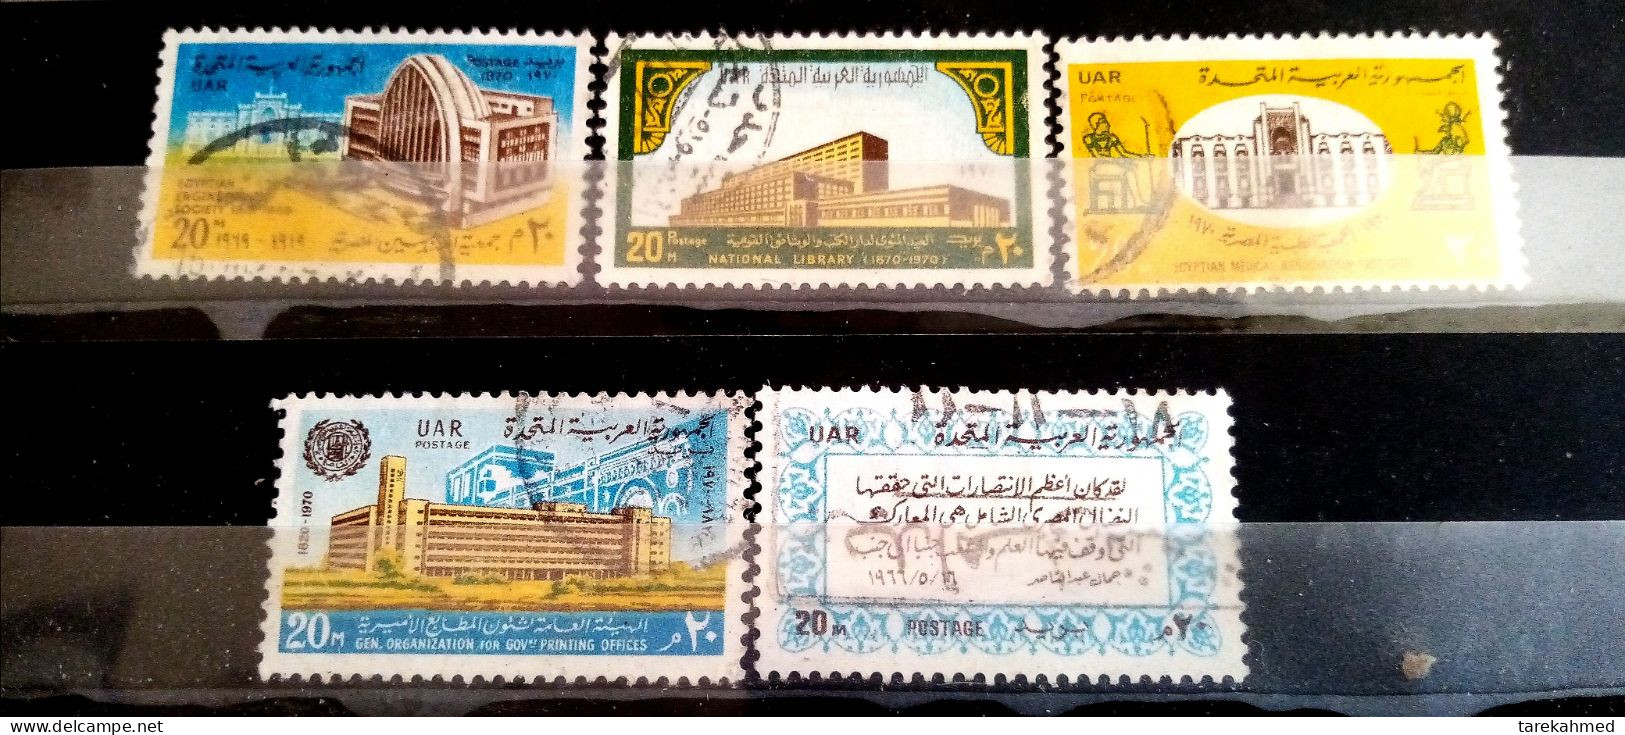 Egypt 1970, Rare Complete Set Of The 50th Anniversary Mi. 1016-20, VF - Used Stamps